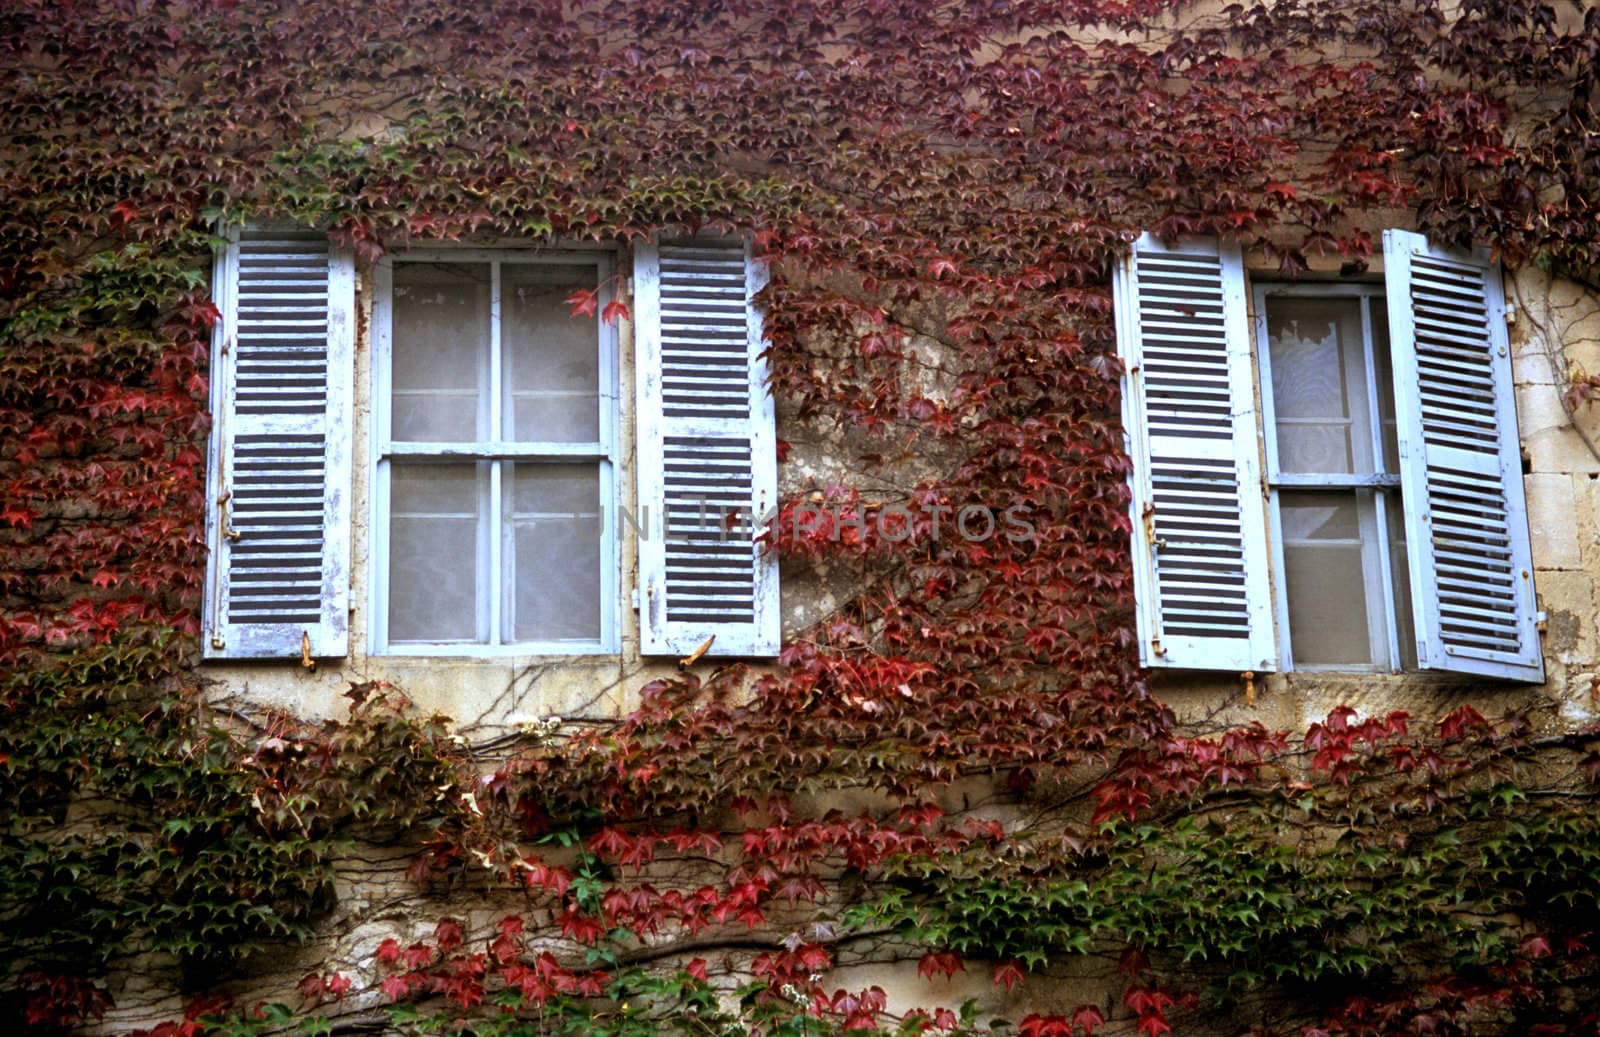 Windows and Vines by ACMPhoto